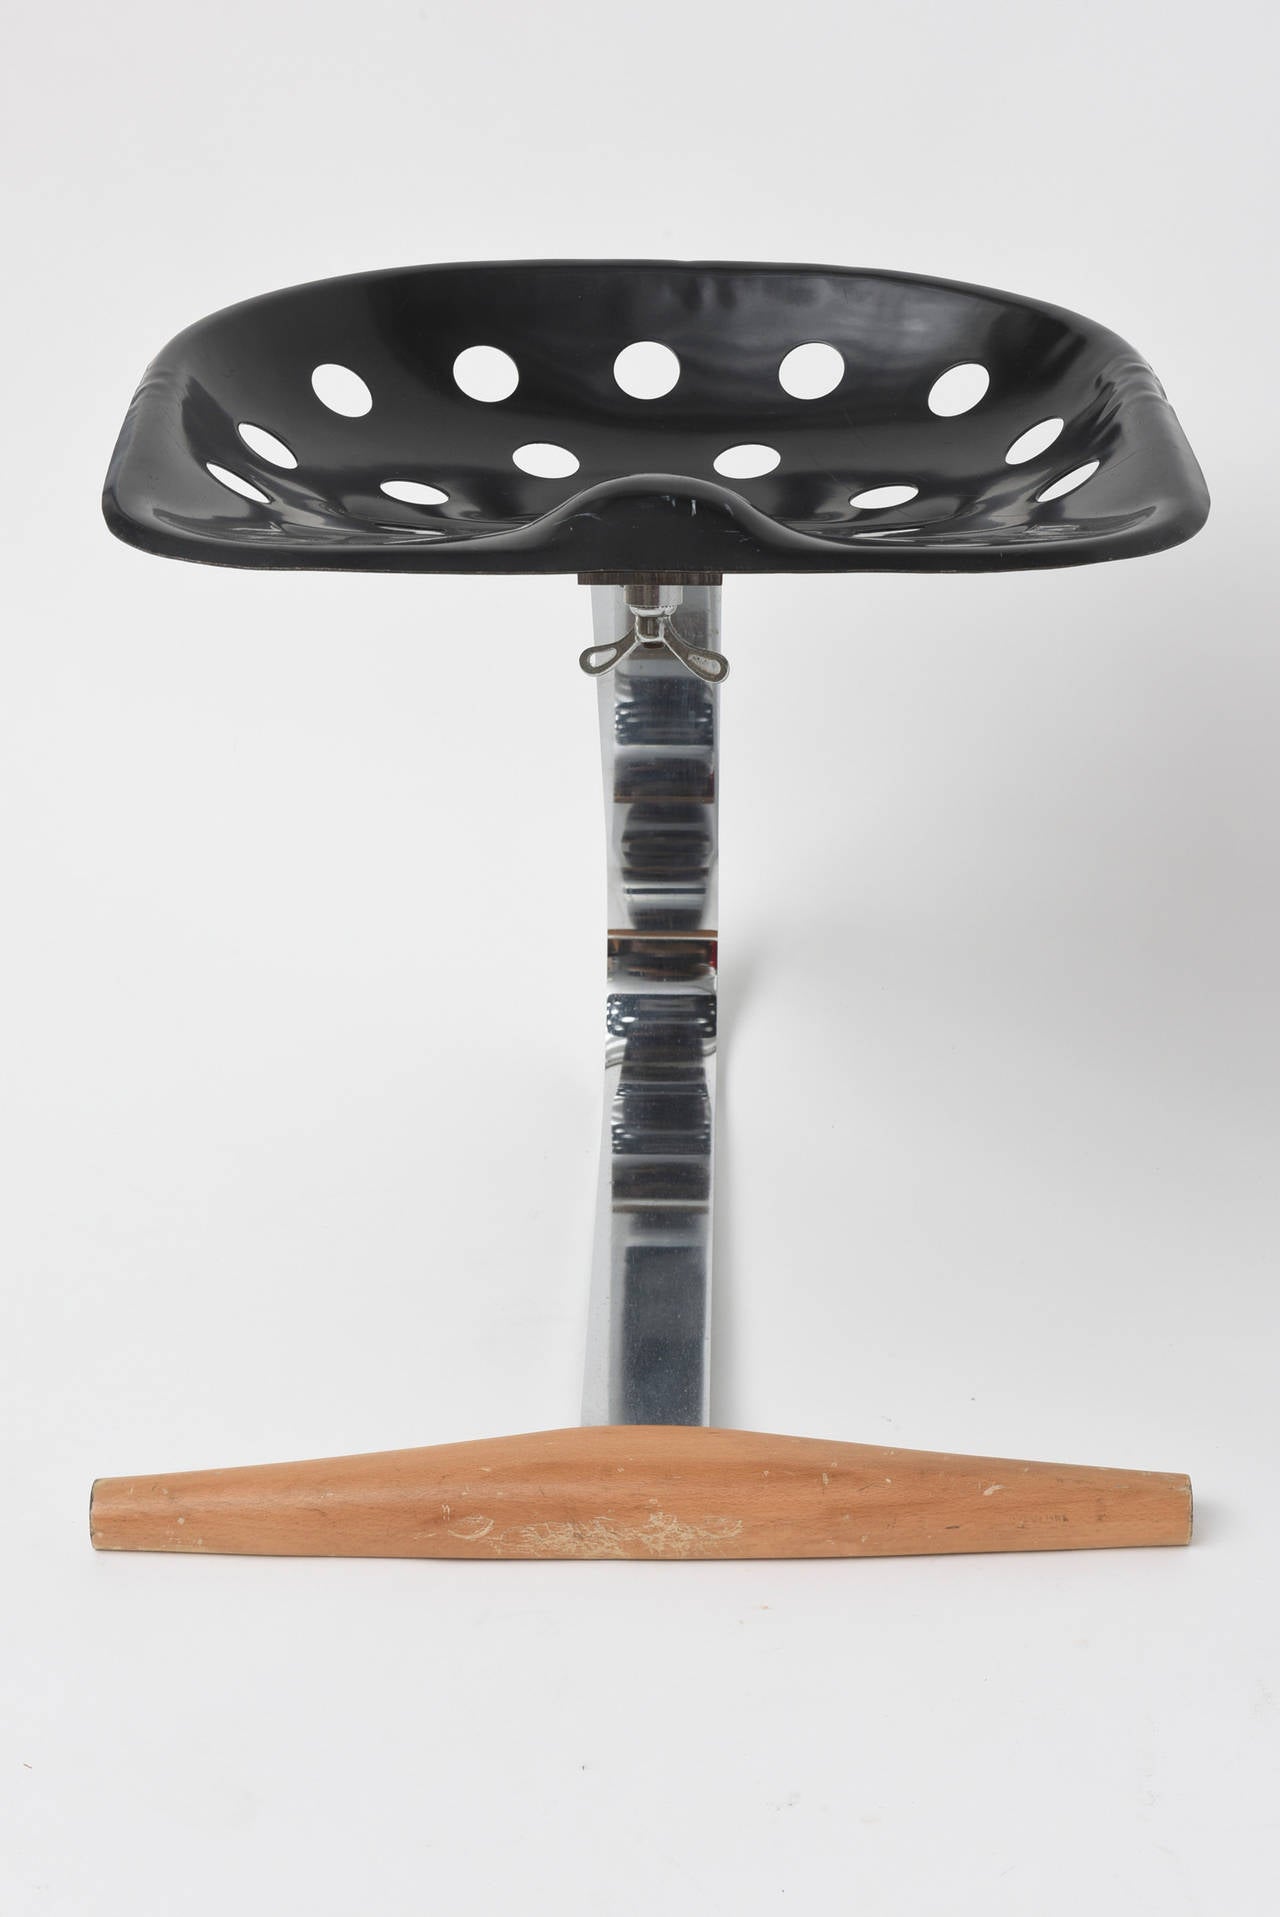 The first model of the stool was presented at the 1954 Milan Triennial.
It was presented under the banner of Art and Production.